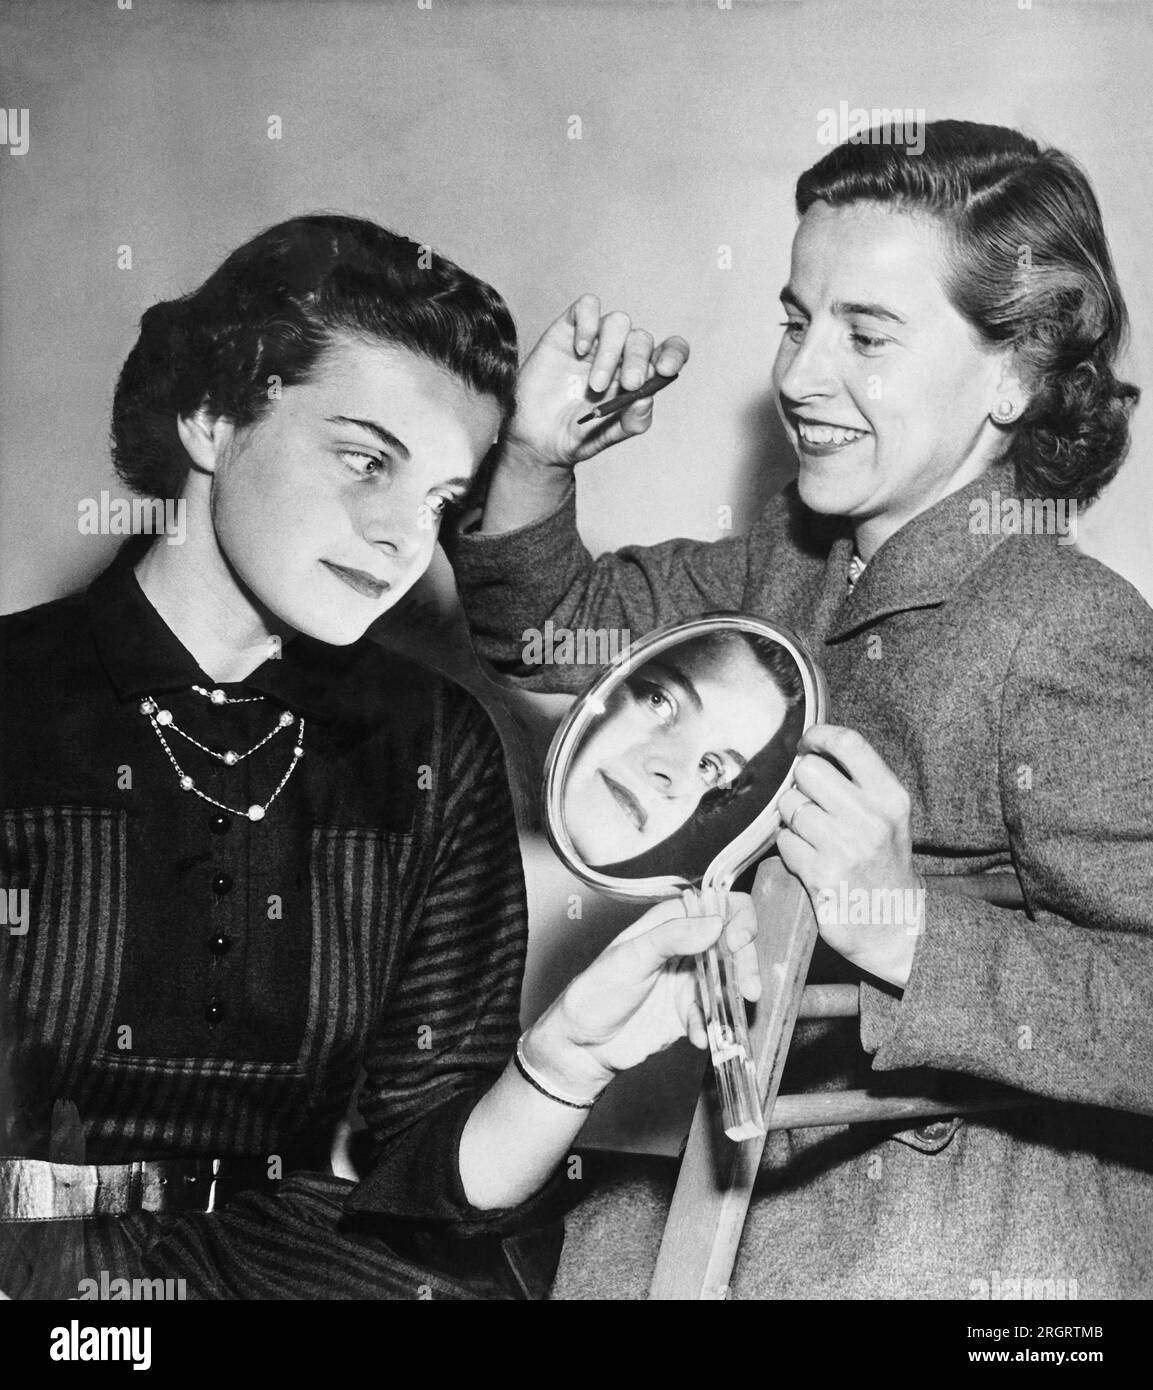 San Francisco, California:  October 24, 1955 Dianne Goldman gets her makeup touched up by Mrs. Frank HInman for a photo shoot as a doctor's model. Stock Photo